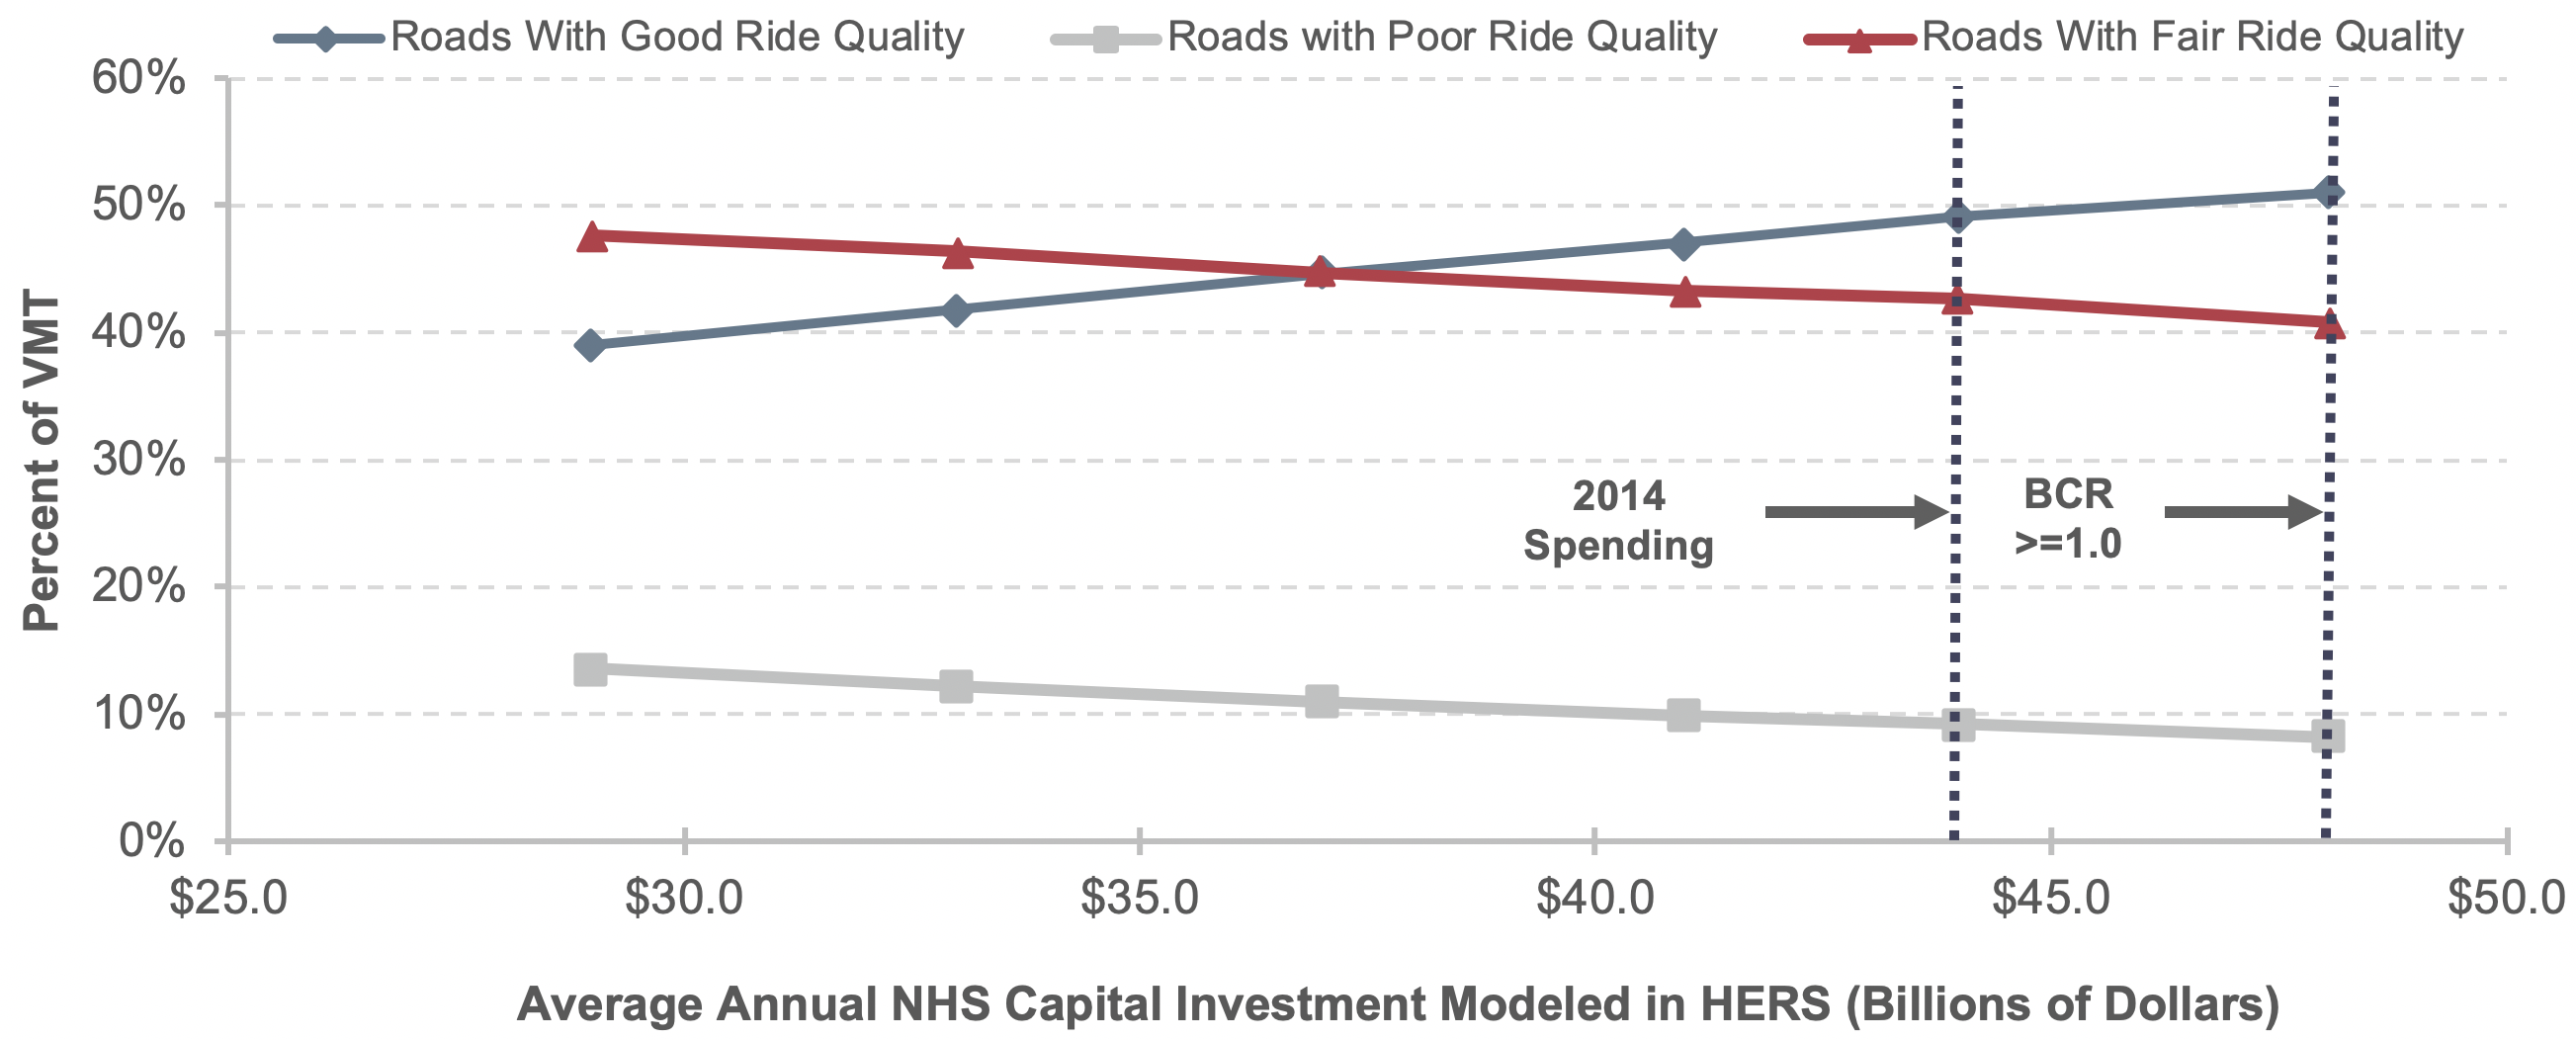 A line graph plots values for VMT on roads with good, fair, and poor ride quality in percent over average annual NHS rehabilitation investment in billions of dollars modeled in HERS.  For the share of roads with good ride quality, the plot has an initial value of 39.1 percent of VMT at an annual investment of $29.0 billion, with the trend rising steadily throughout the series to at value of 51.0 percent of VMT at an annual investment of $48.1 billion.  For the share of roads with fair ride quality, the plot has an initial value of 47.7 percent of VMT at an annual investment of $29.0 billion, with the trend falling steadily to a value of 40.8 percent of VMT at an annual investment of $48.1 billion.  For the share of roads with poor ride quality, the plot has an initial value of 13.6 percent of VMT at an annual investment of $29.0 billion, and decreases gradually throughout the series to 8.2% at an annual investment of $48.1 billion.  Source:  Highway Economic Requirements System.